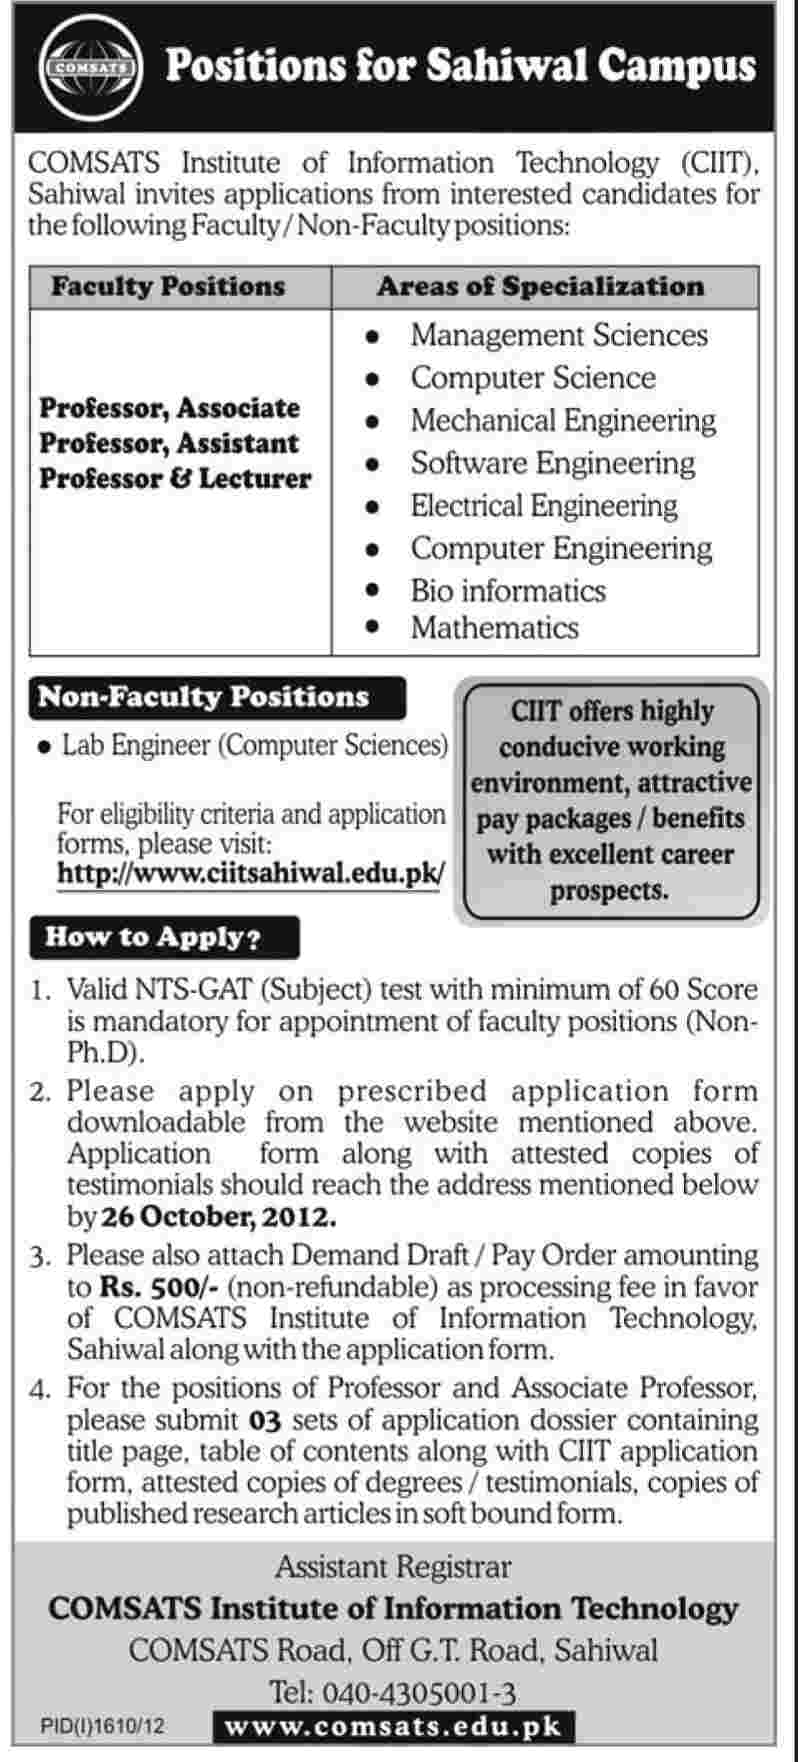 Positions For COMSATS Sahiwal Campus